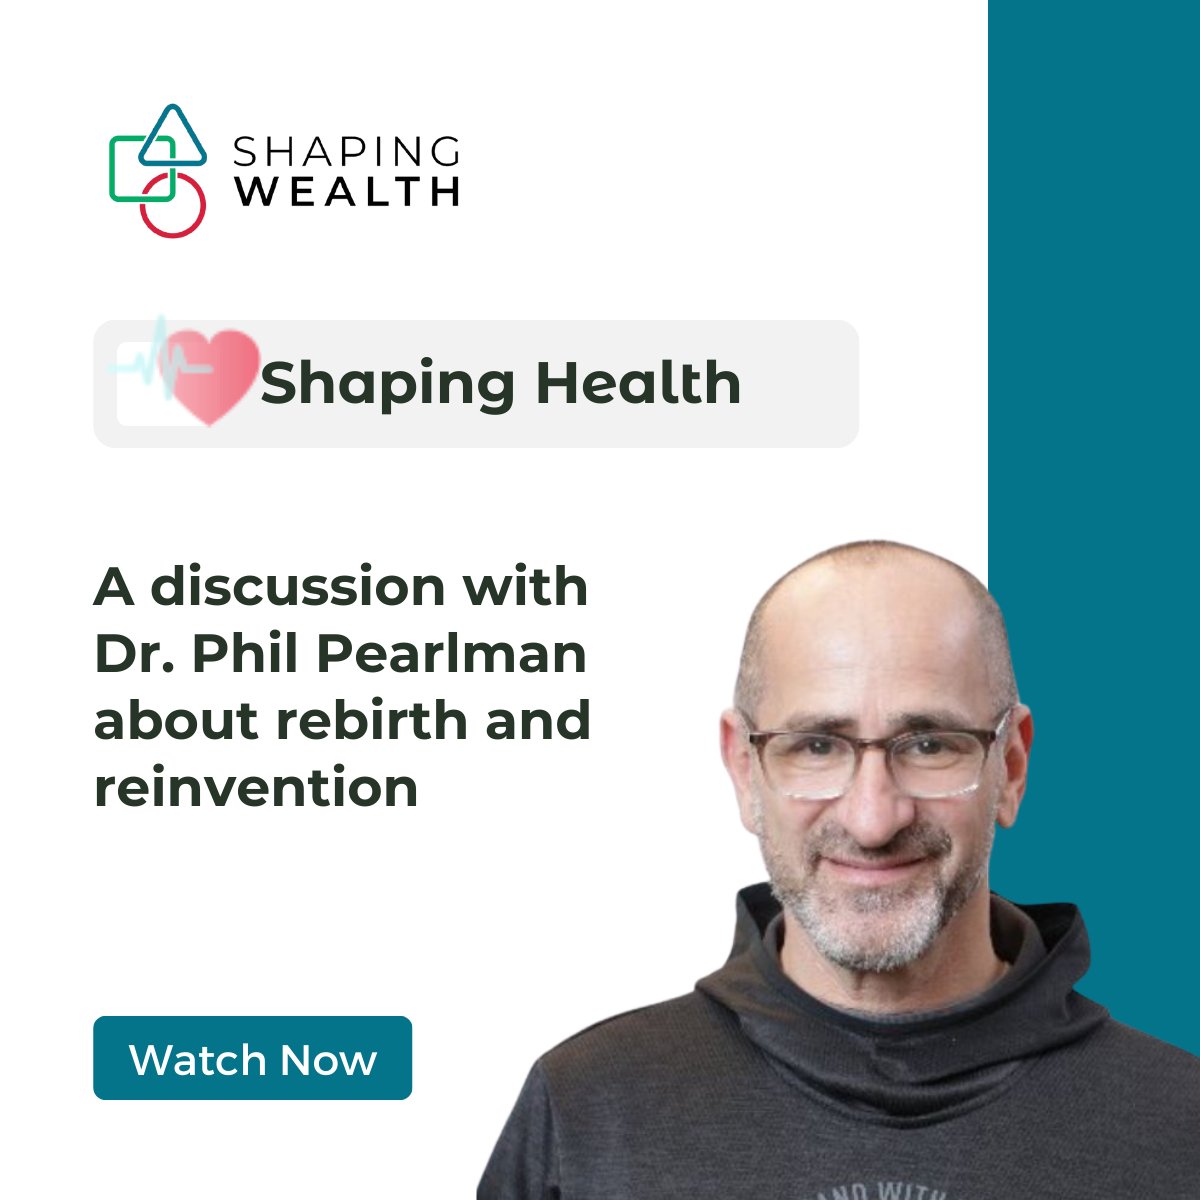 Spring has sprung! 🌷 Catch the latest Shaping Health 🩺 where @ppearlman and @brianportnoy tackle the topics of rebirth & reinvention, encouraging personal audits and gradual adaptations that align with natural and evolutionary processes. Watch here: ocbo.shapingwealth.com/shaping-health…